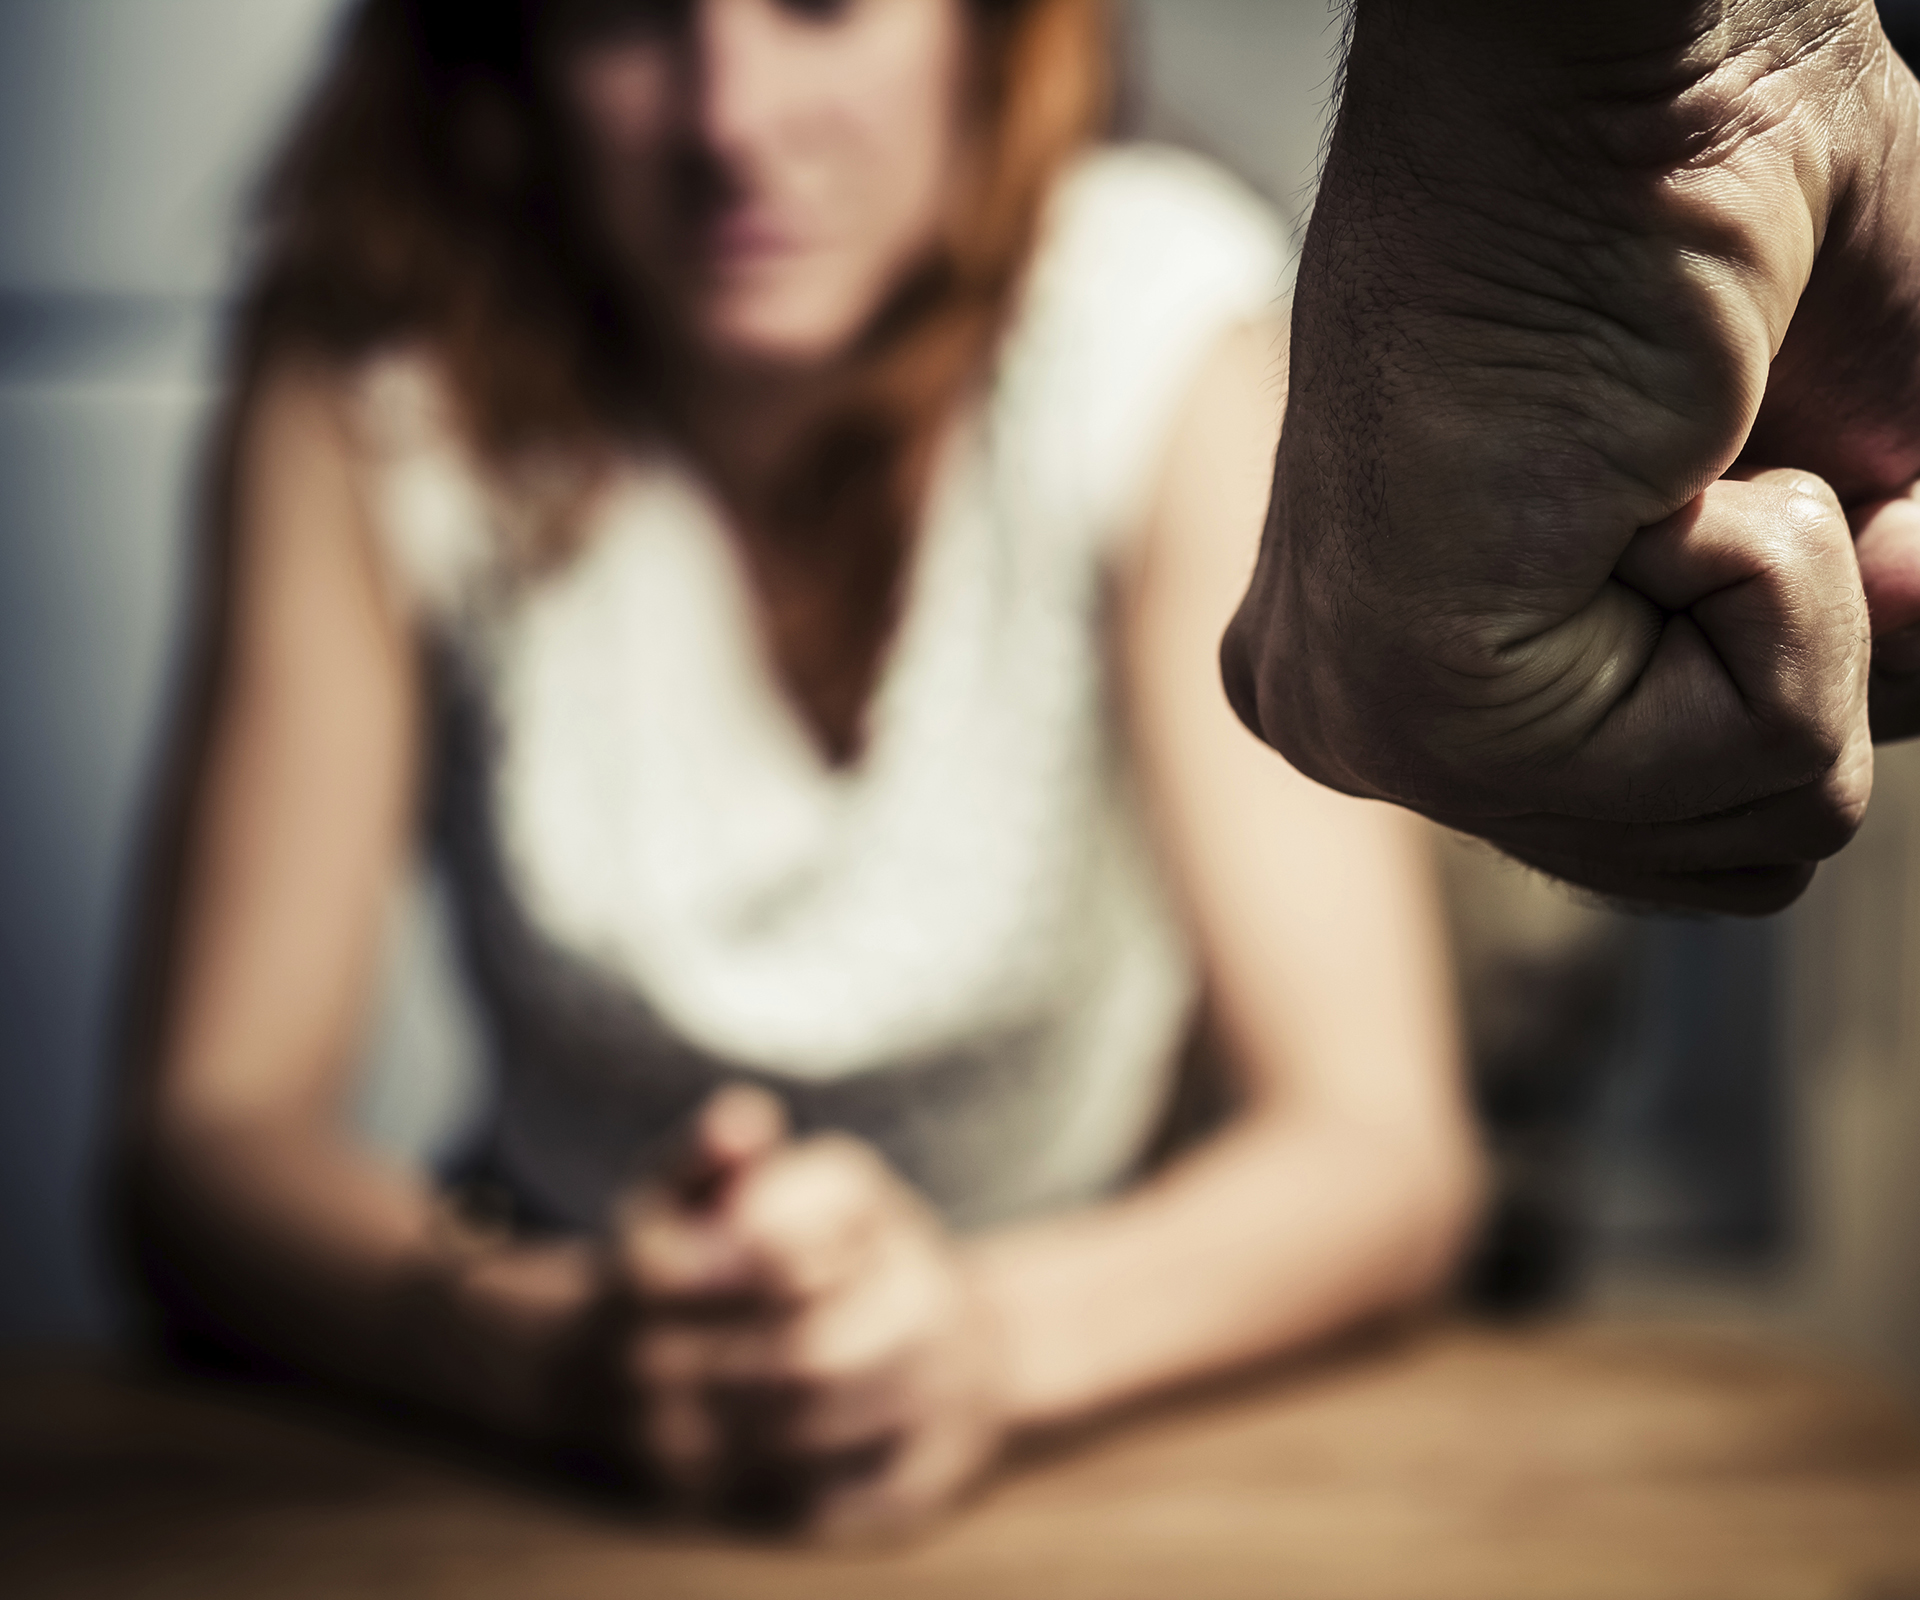 Who are the real victims of domestic violence?